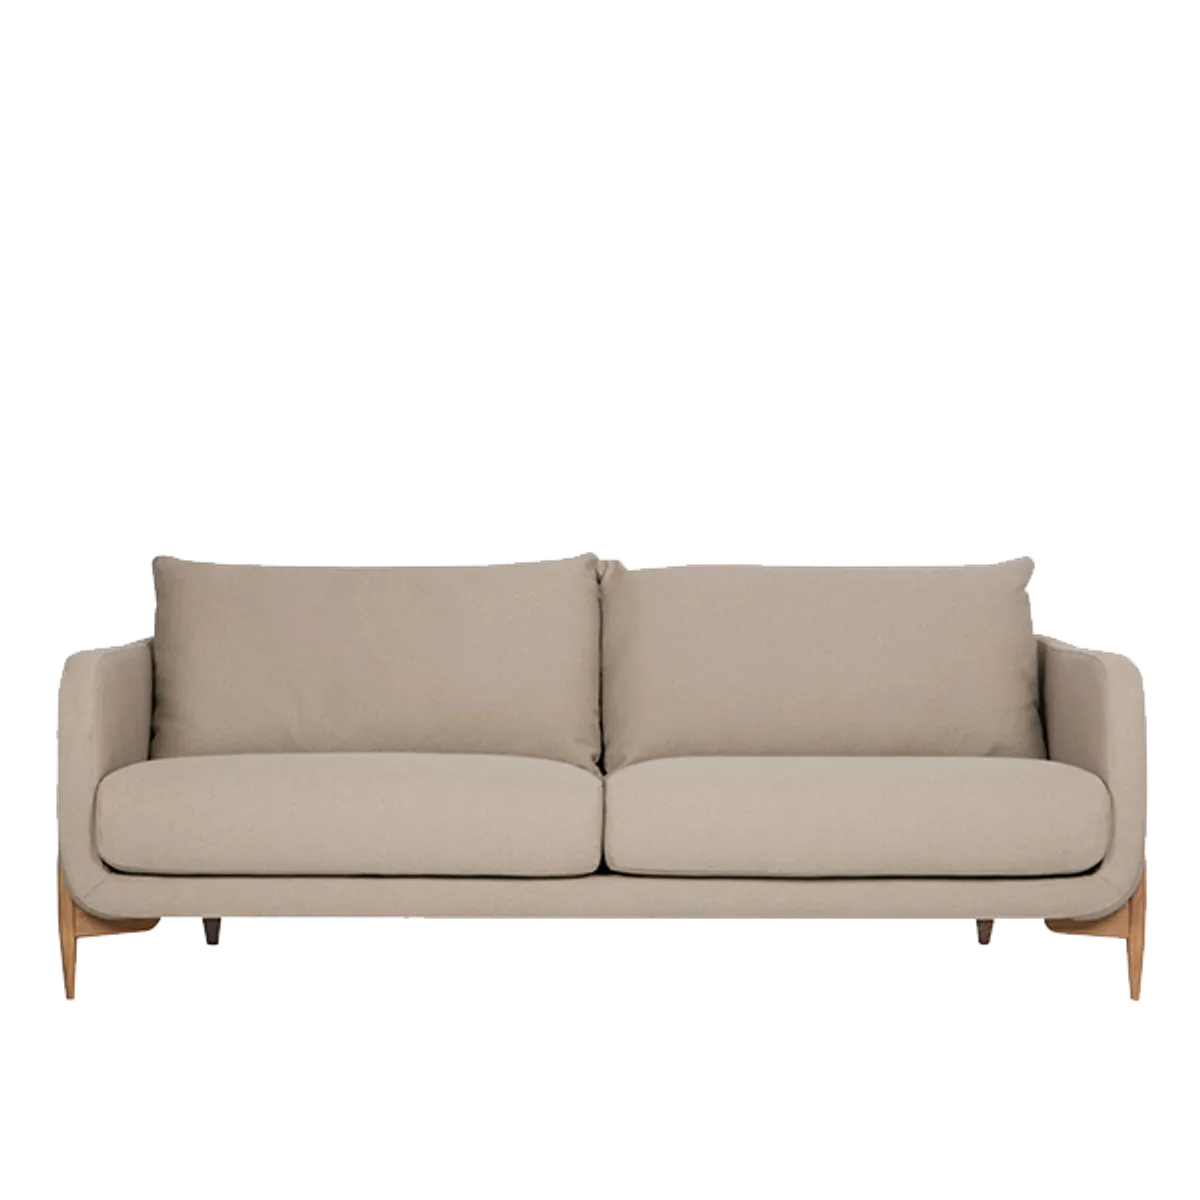 Pippa Sofa Inside Out Contracts